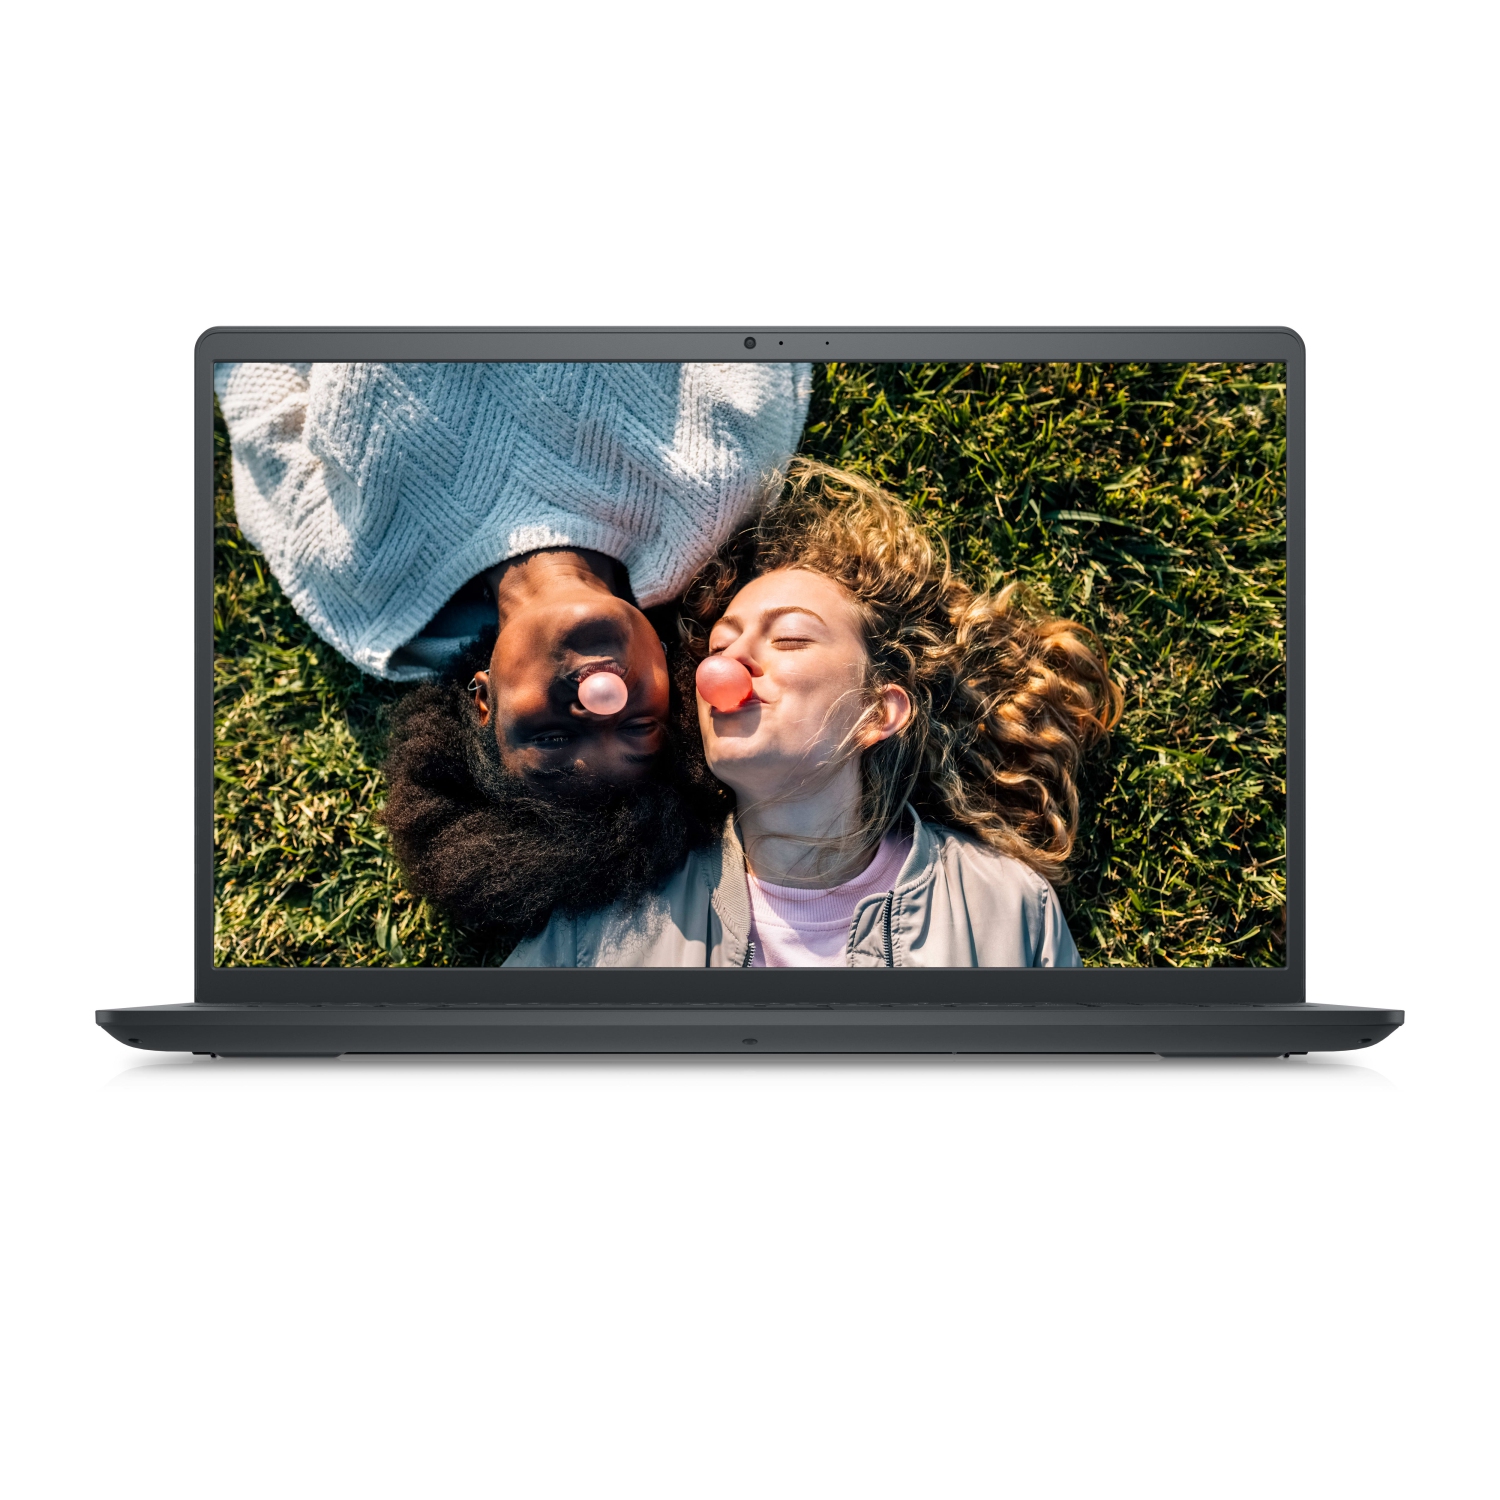 Refurbished (Excellent) – Dell Inspiron 3511 Laptop (2021) | 15.6" FHD | Core i3 - 128GB SSD - 8GB RAM | 2 Cores @ 4.1 GHz - 11th Gen CPU